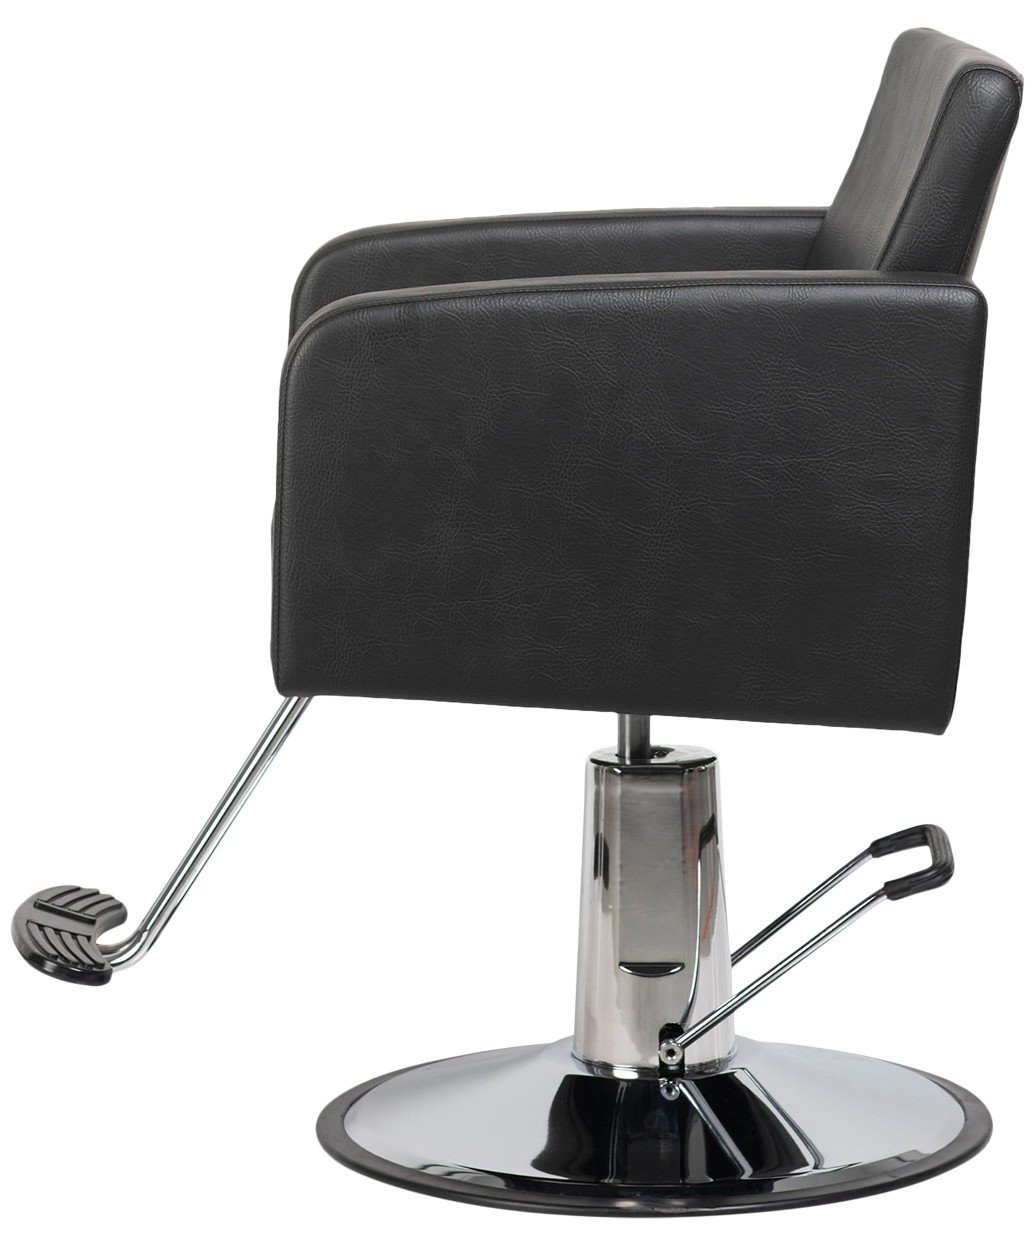 Shelby Styling Chair